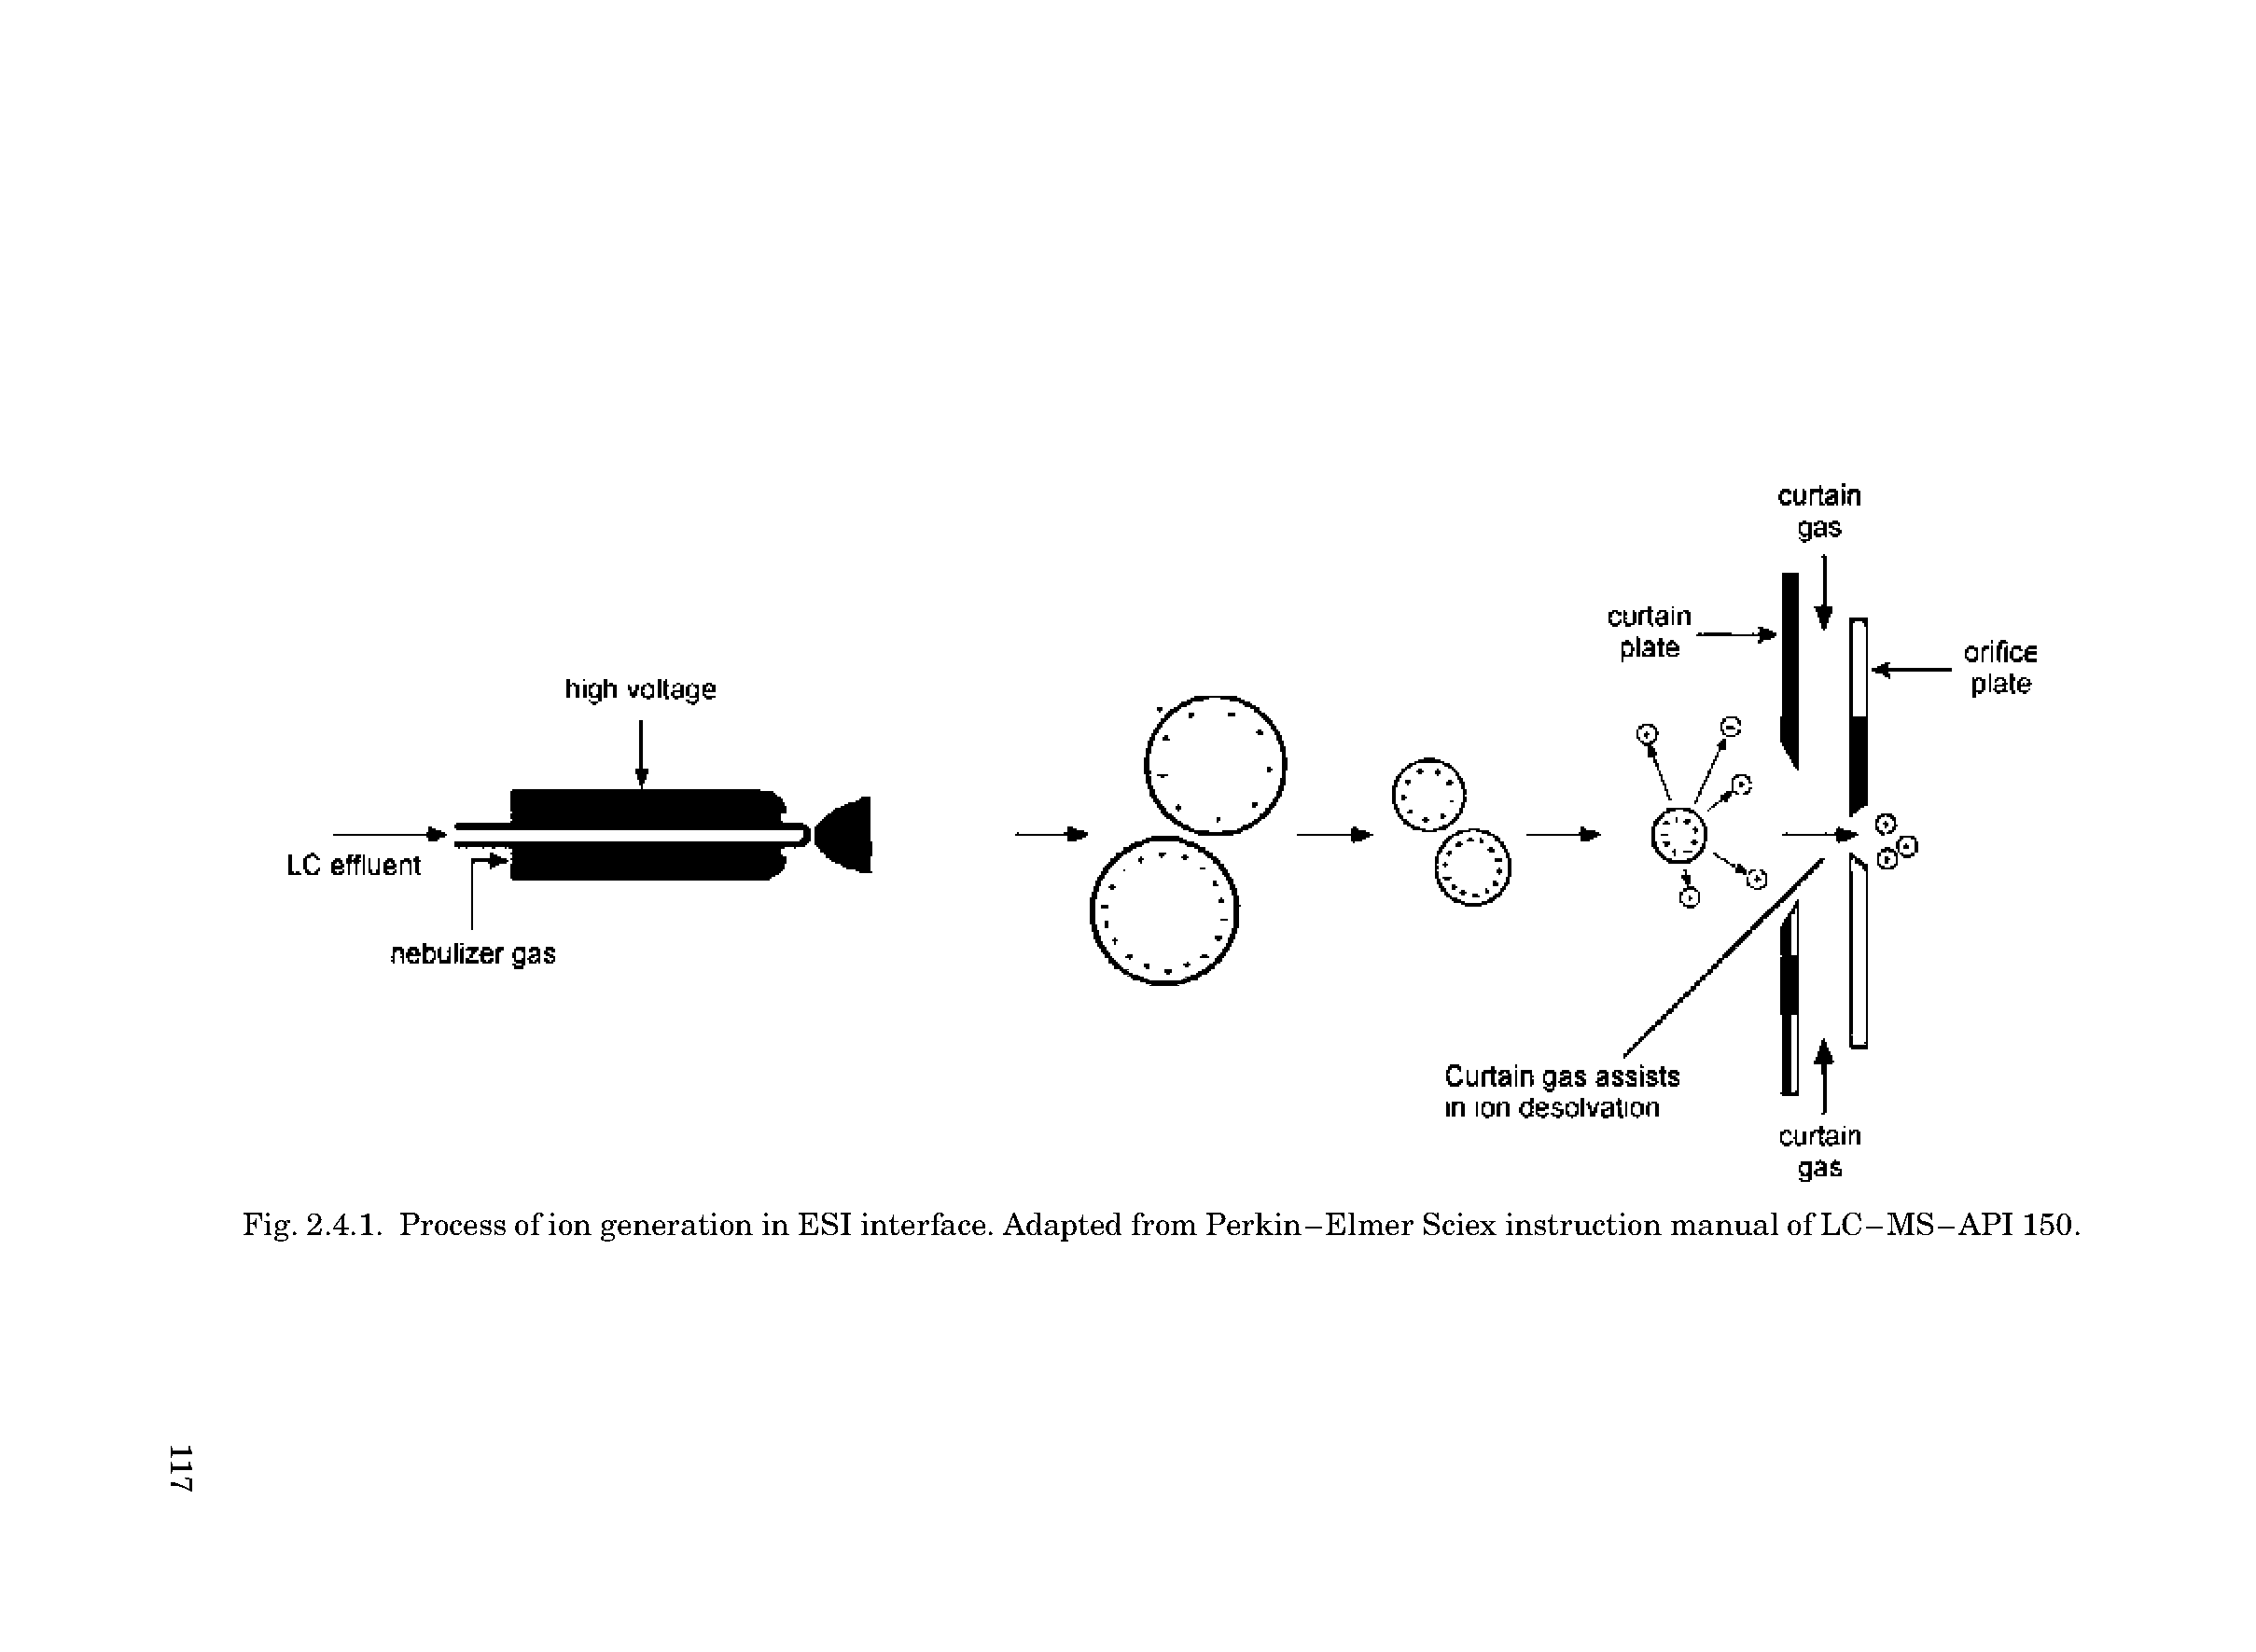 Fig. 2.4.1. Process of ion generation in ESI interface. Adapted from Perkin-Elmer Sciex instruction manual of LC-MS-API 150.